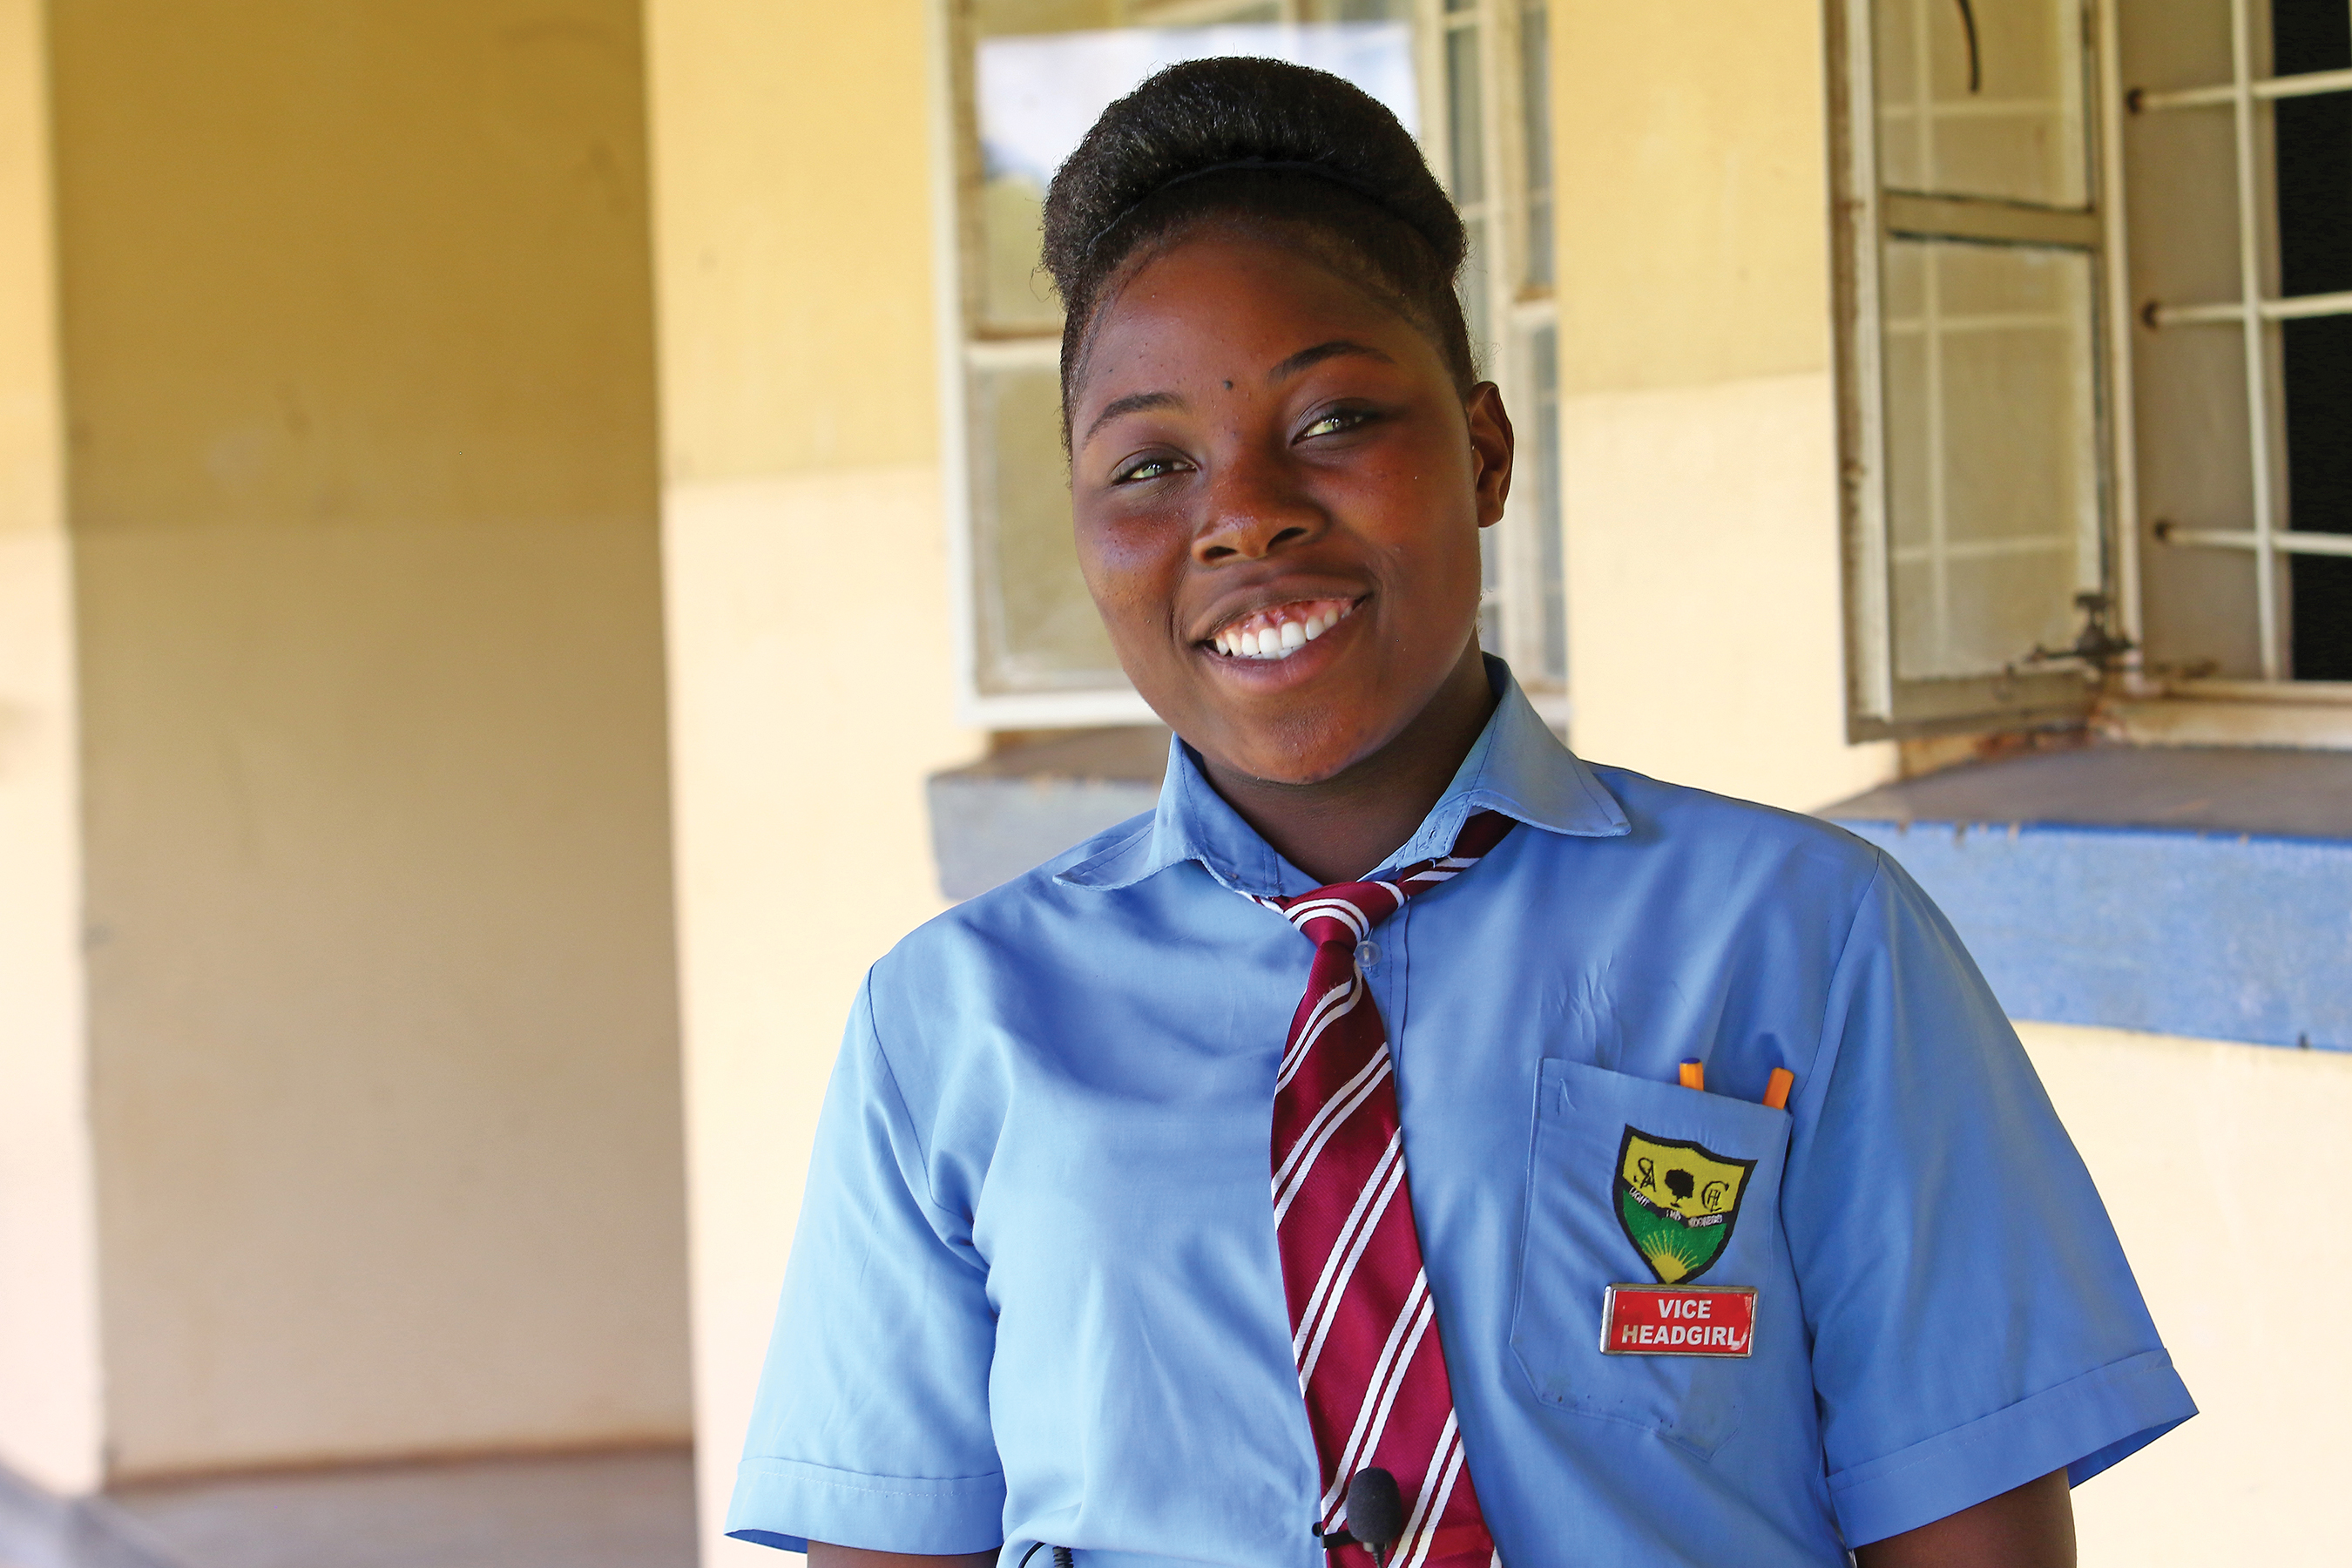 Christine, a senior and the vice-headgirl at The Salvation Army’s Chikankata Secondary School, smiles